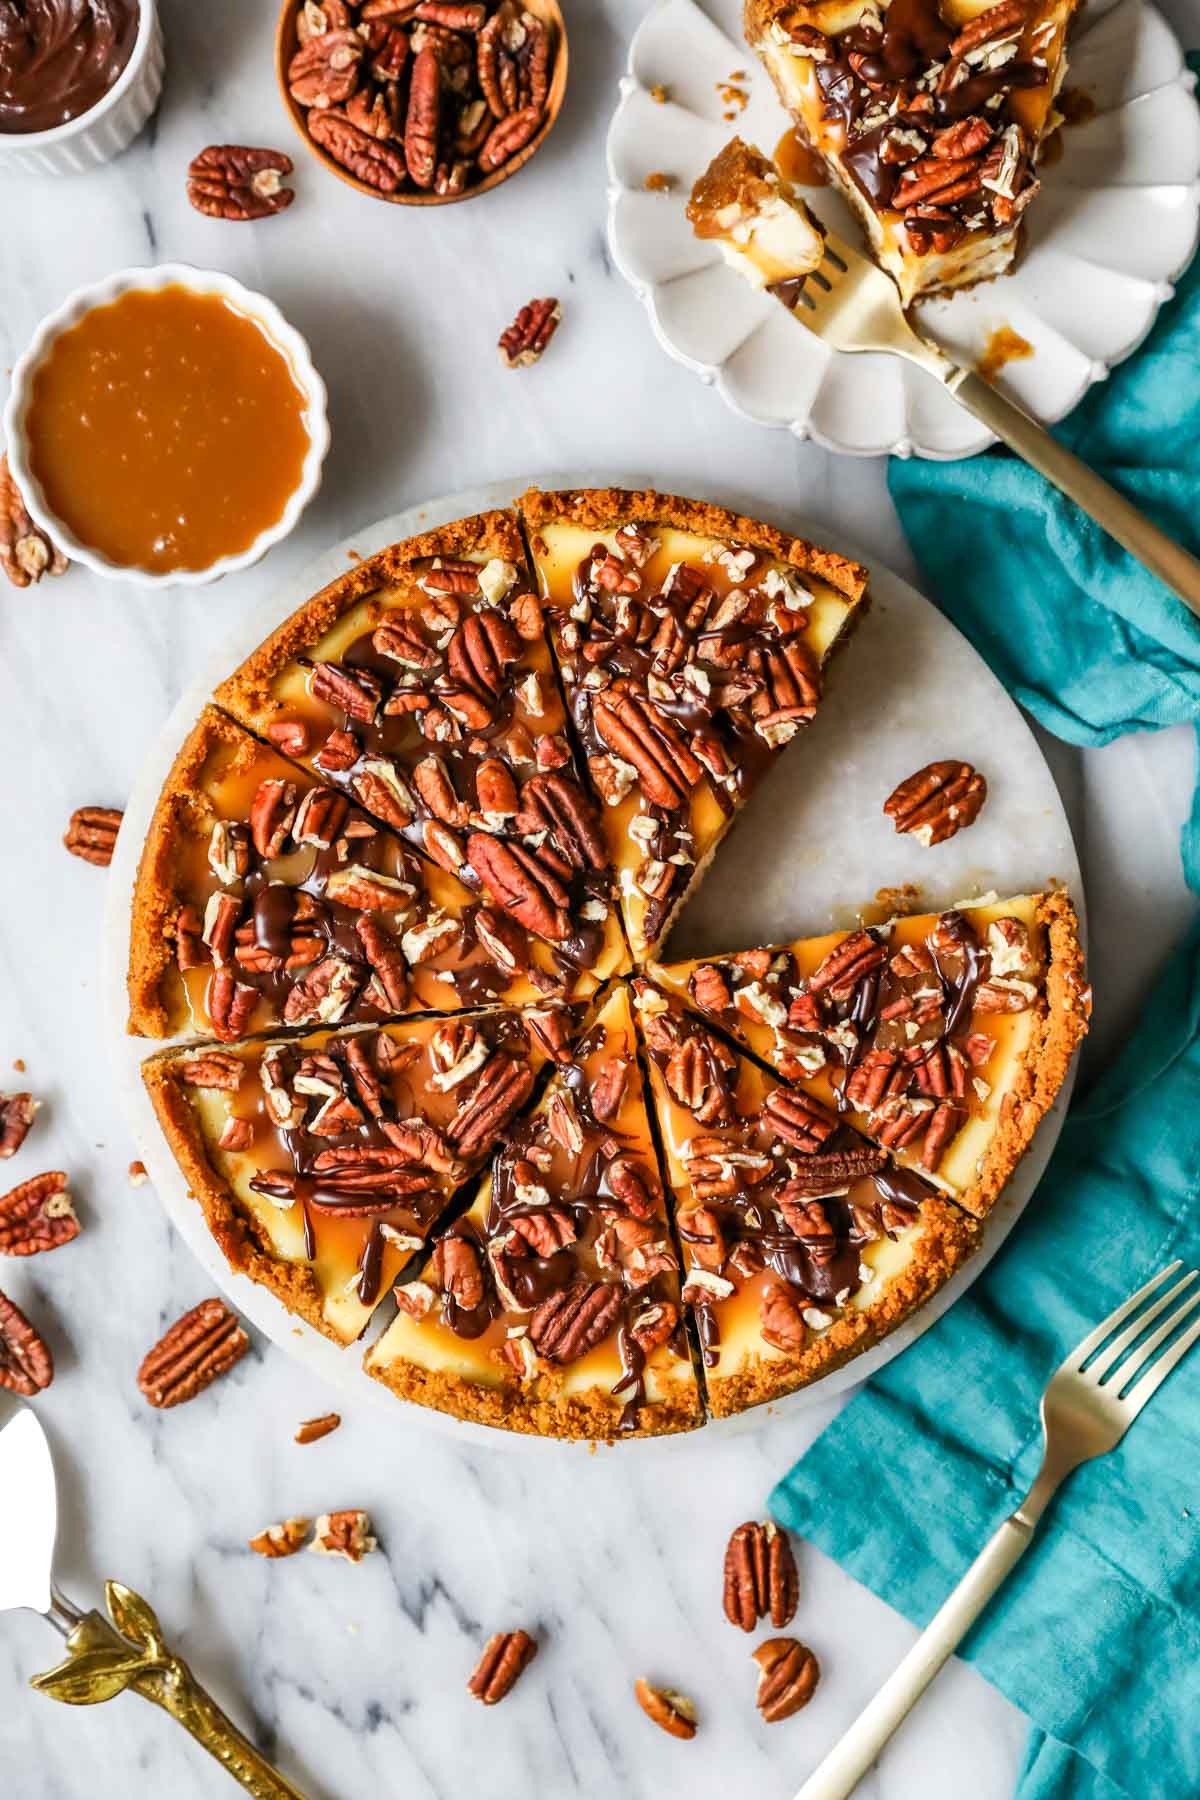 Overhead view of a cheesecake topped with caramel, pecans, and chocolate that's been cut into slices with one slice removed.